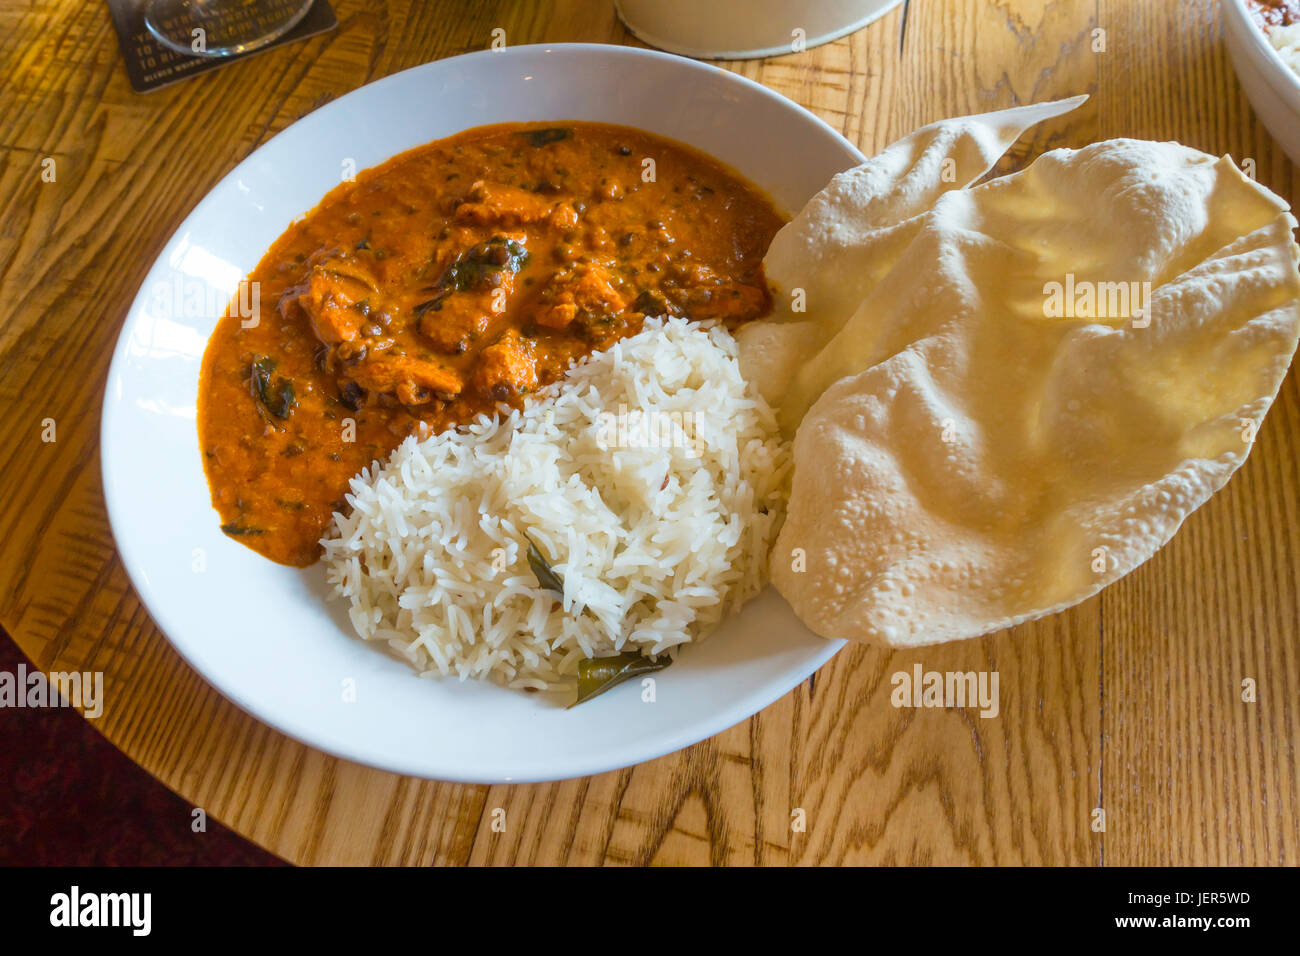 Pub meal Chicken Tikka Makhani Tandoori with chicken pieces lentil cashew nut and spinach sauce with cumin infused tadka rice and a crisp poppadom Stock Photo